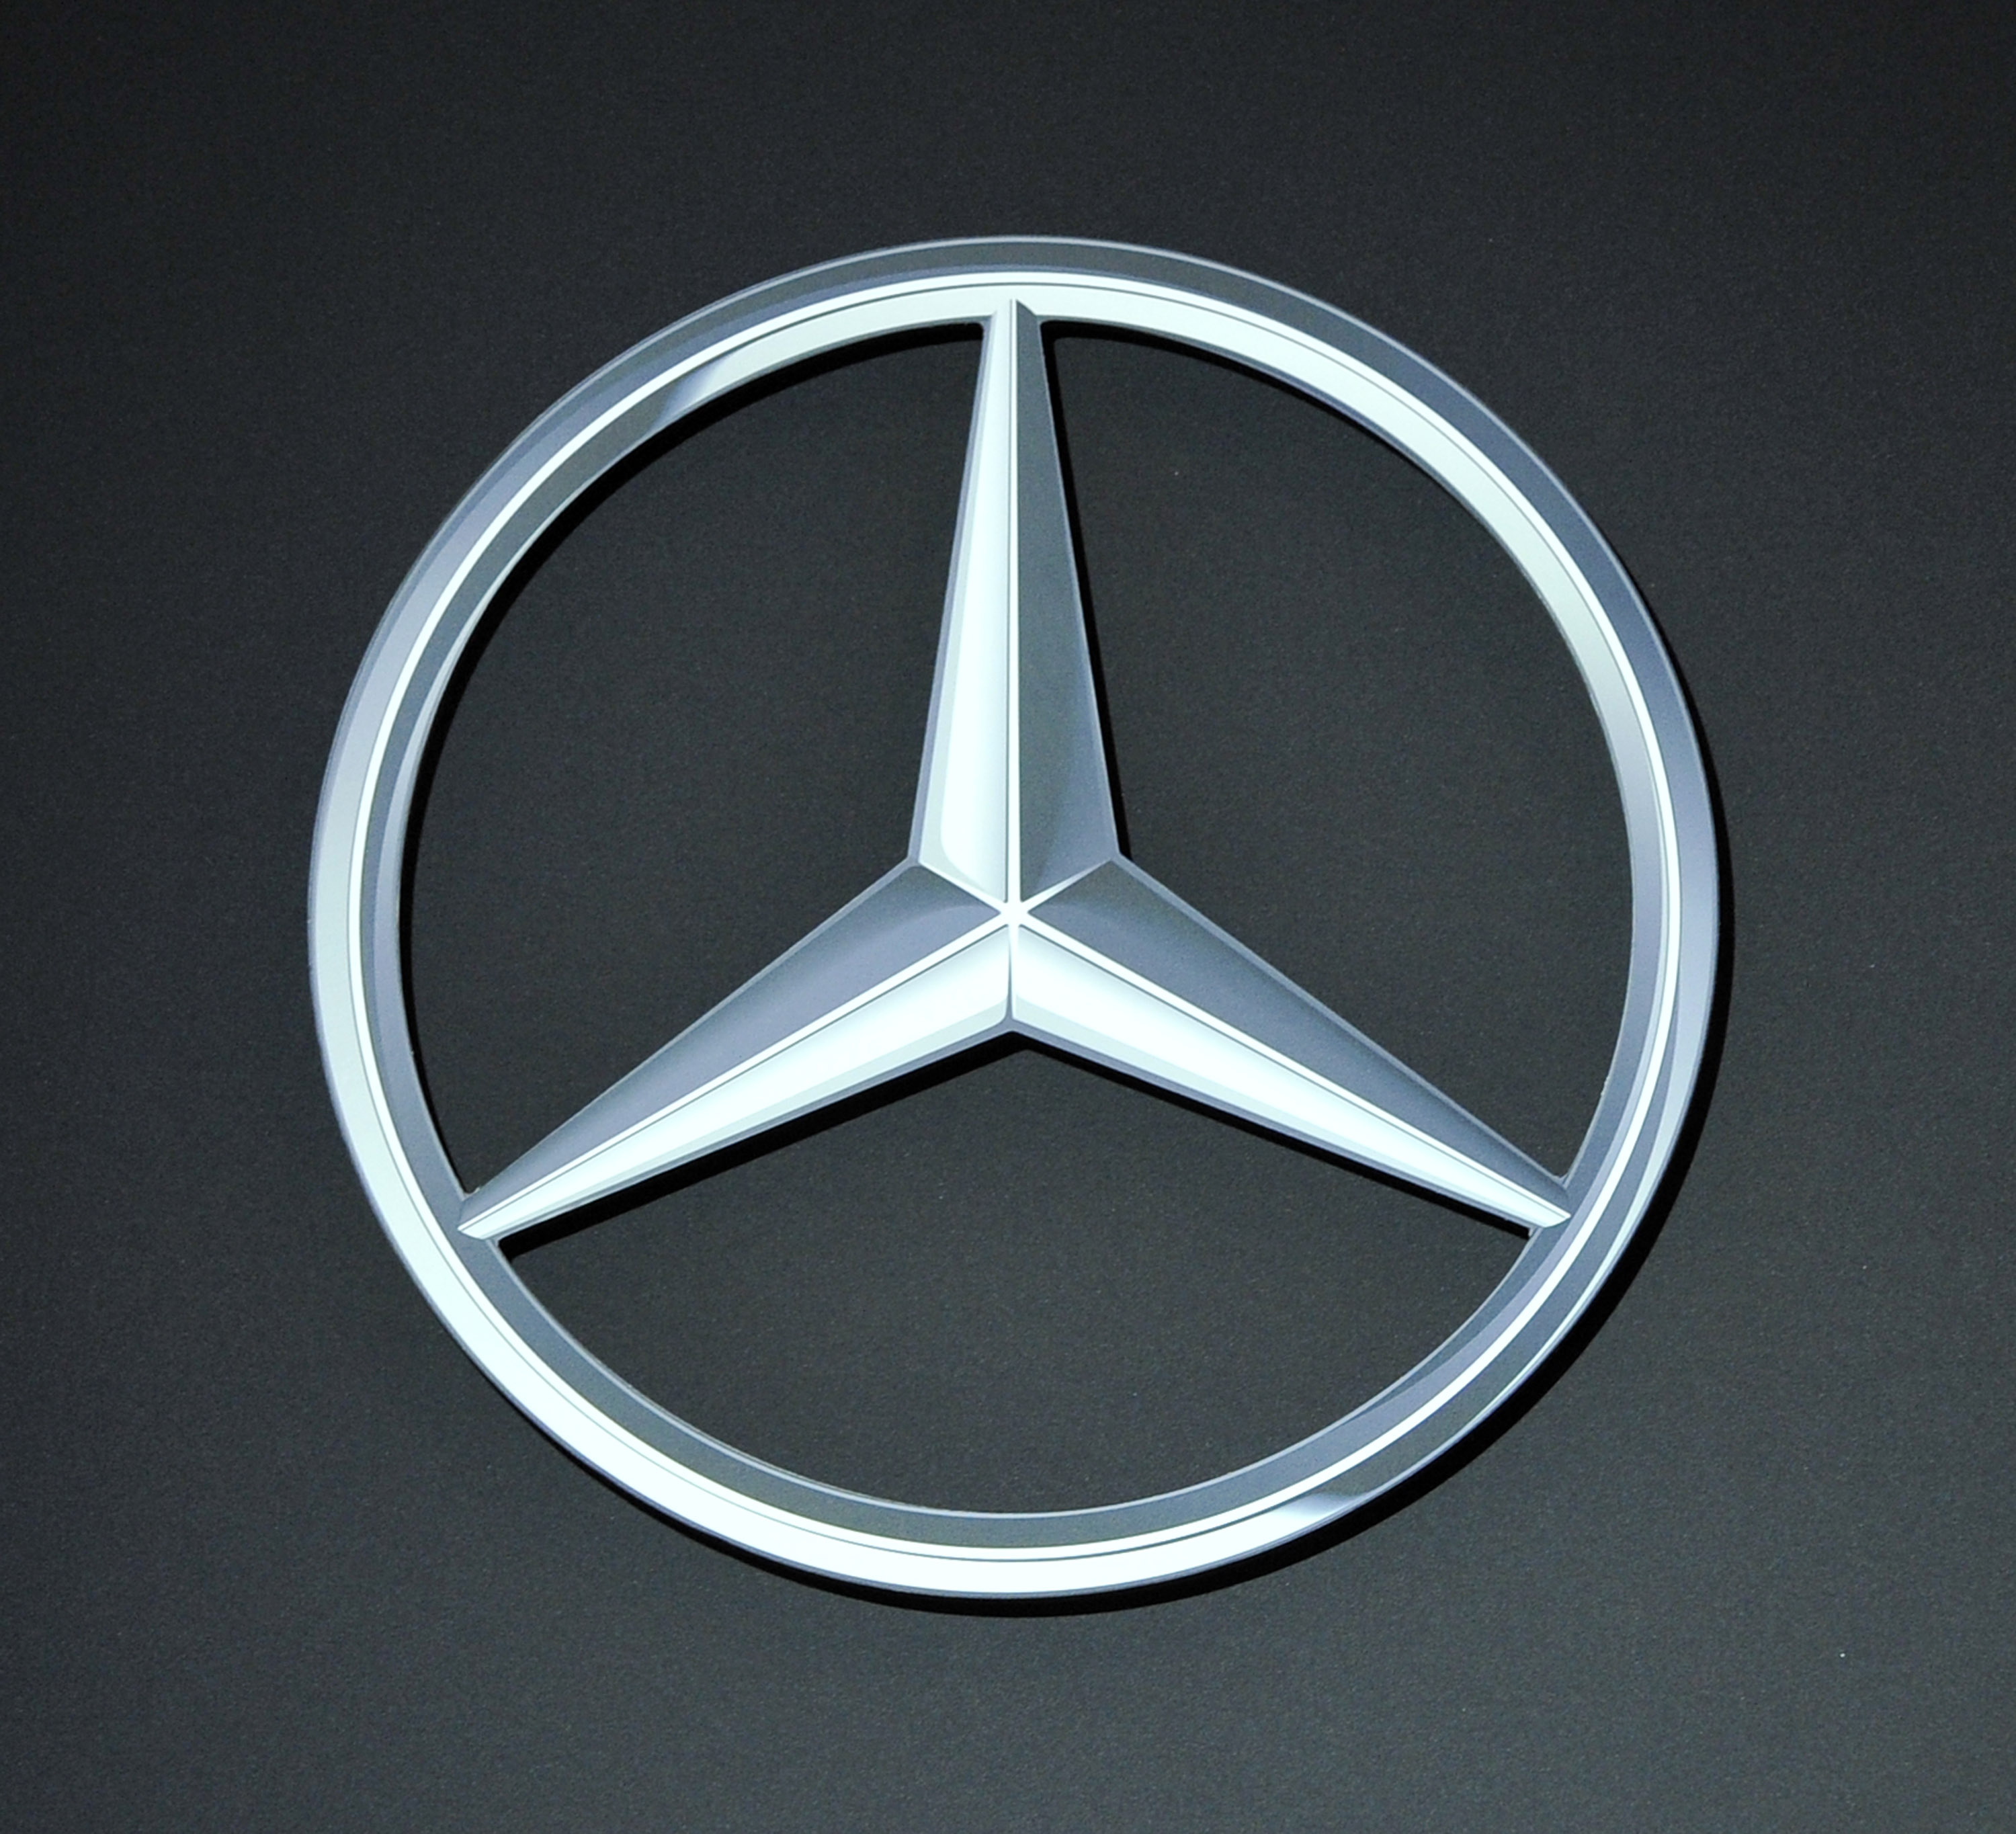 The logo for Mercedes-Benz on display at the Chicago Auto Show